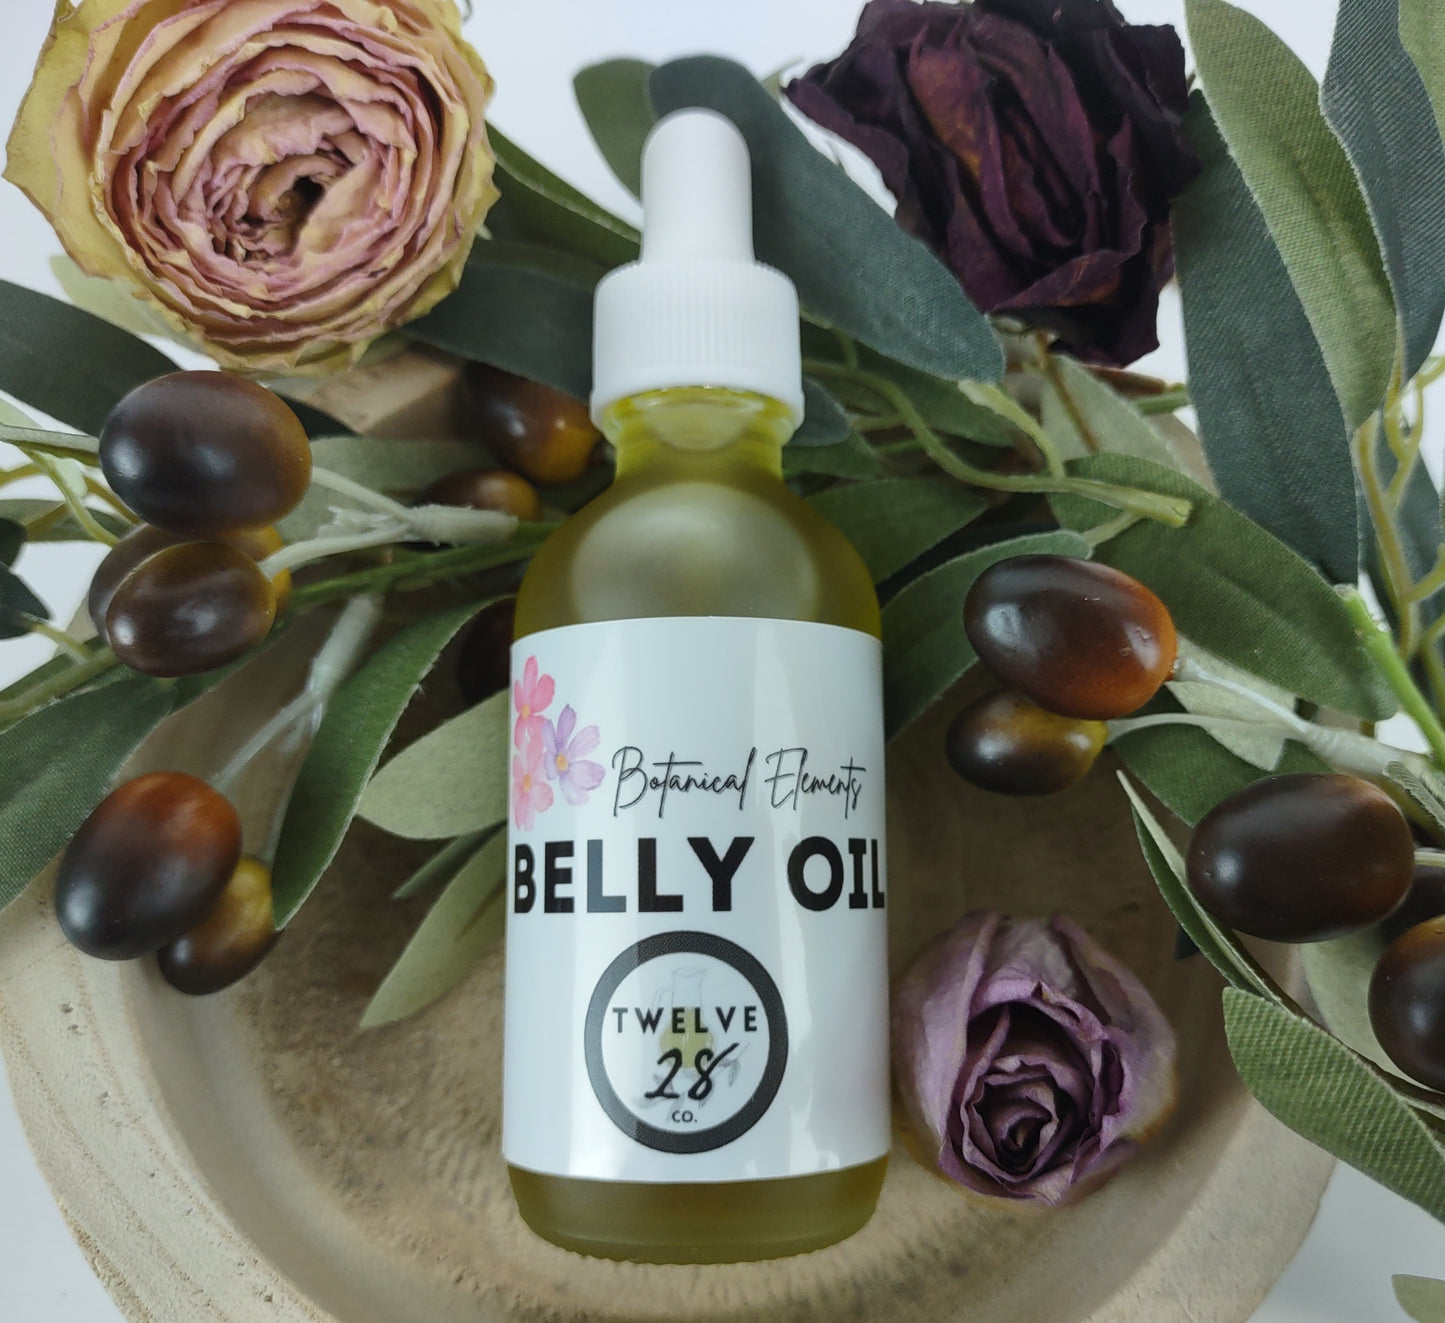 Organic Belly Oil, Pregnancy Mom to be gift, Helps Prevent Stretch Marks, Vegan, Gift for Pregnant Mom to be, Belly Butter Cream Alternative